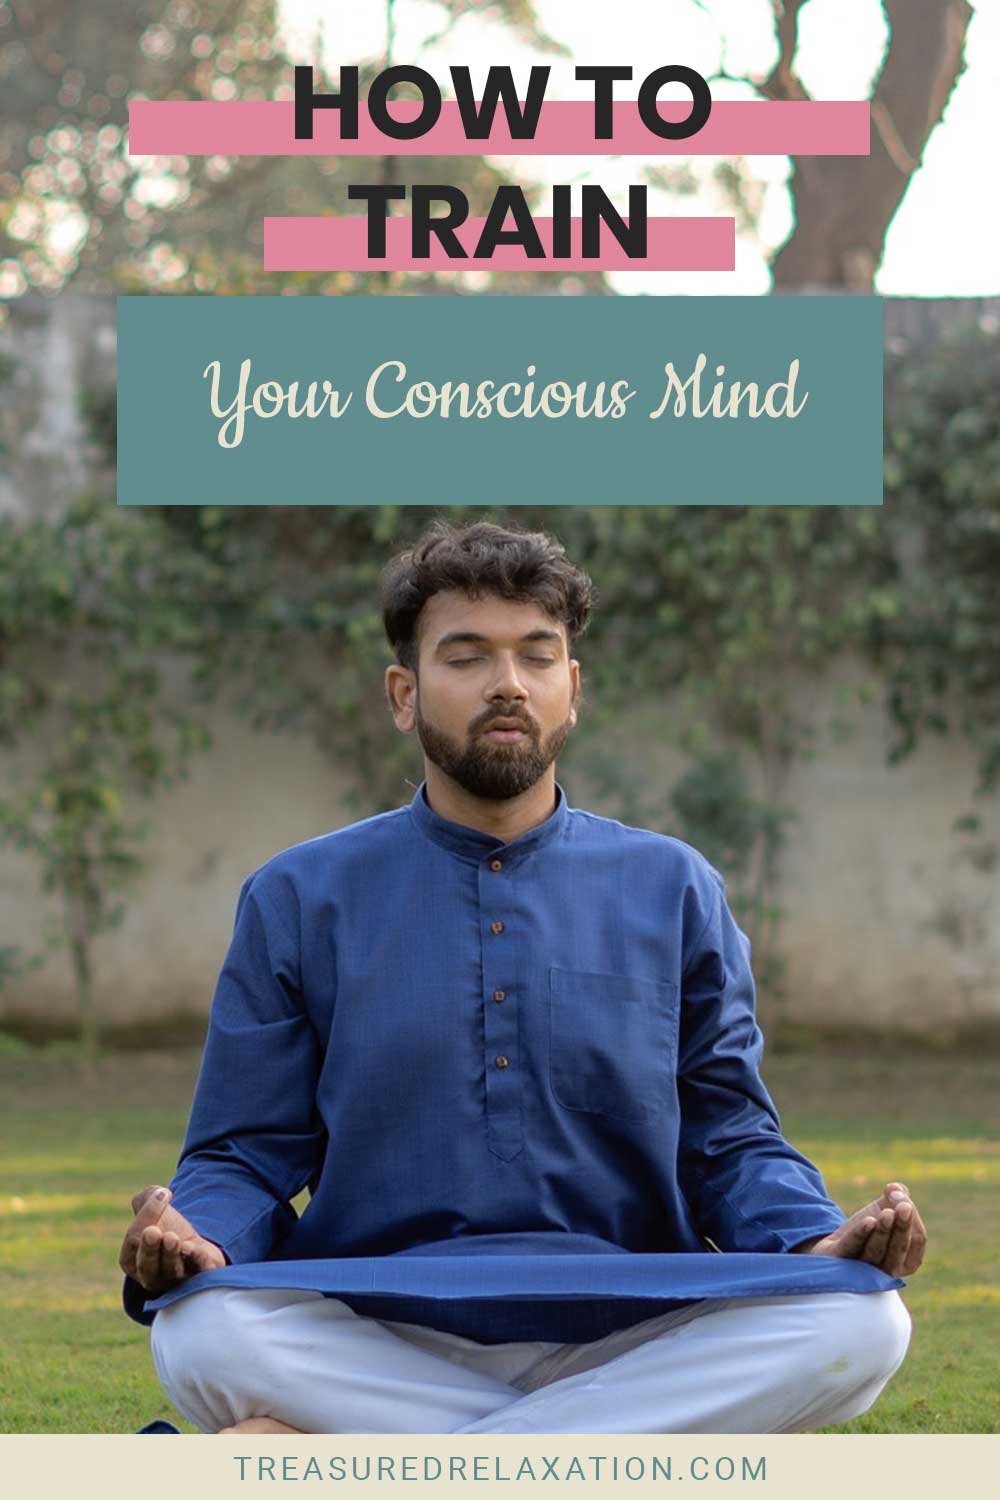 How to Train Your Conscious Mind